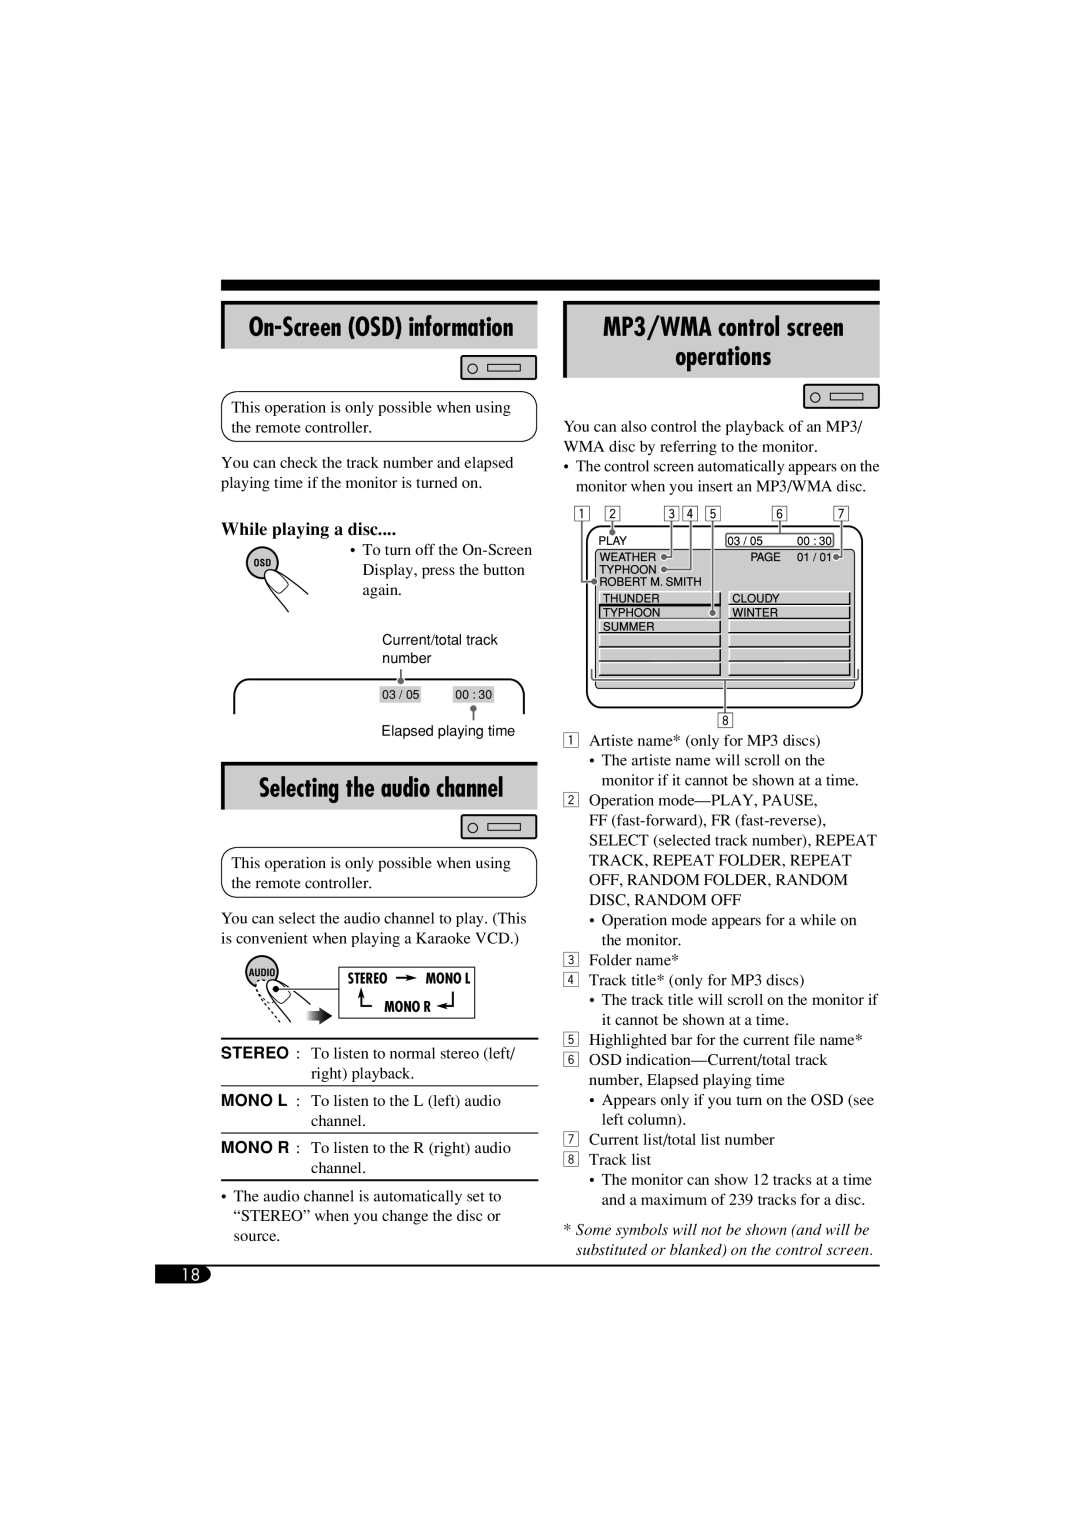 JVC KD-SV3104 manual MP3/WMA control screen operations, Selecting the audio channel, While playing a disc 